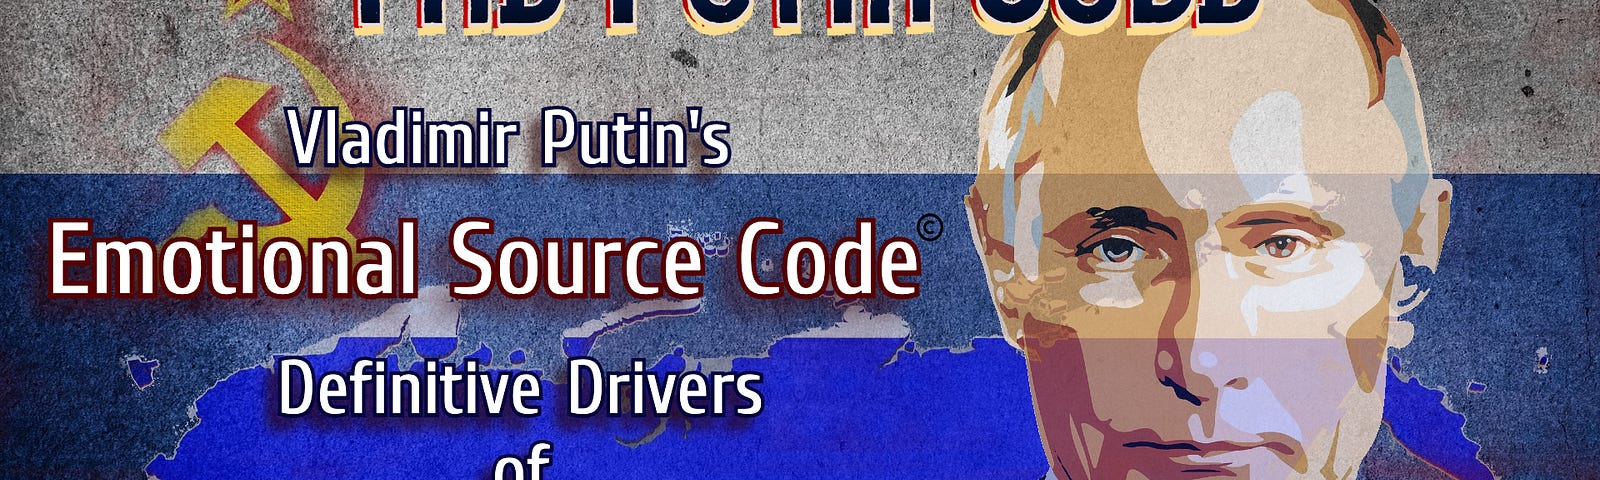 Discover the Psychological Drivers of Vladimir Putin